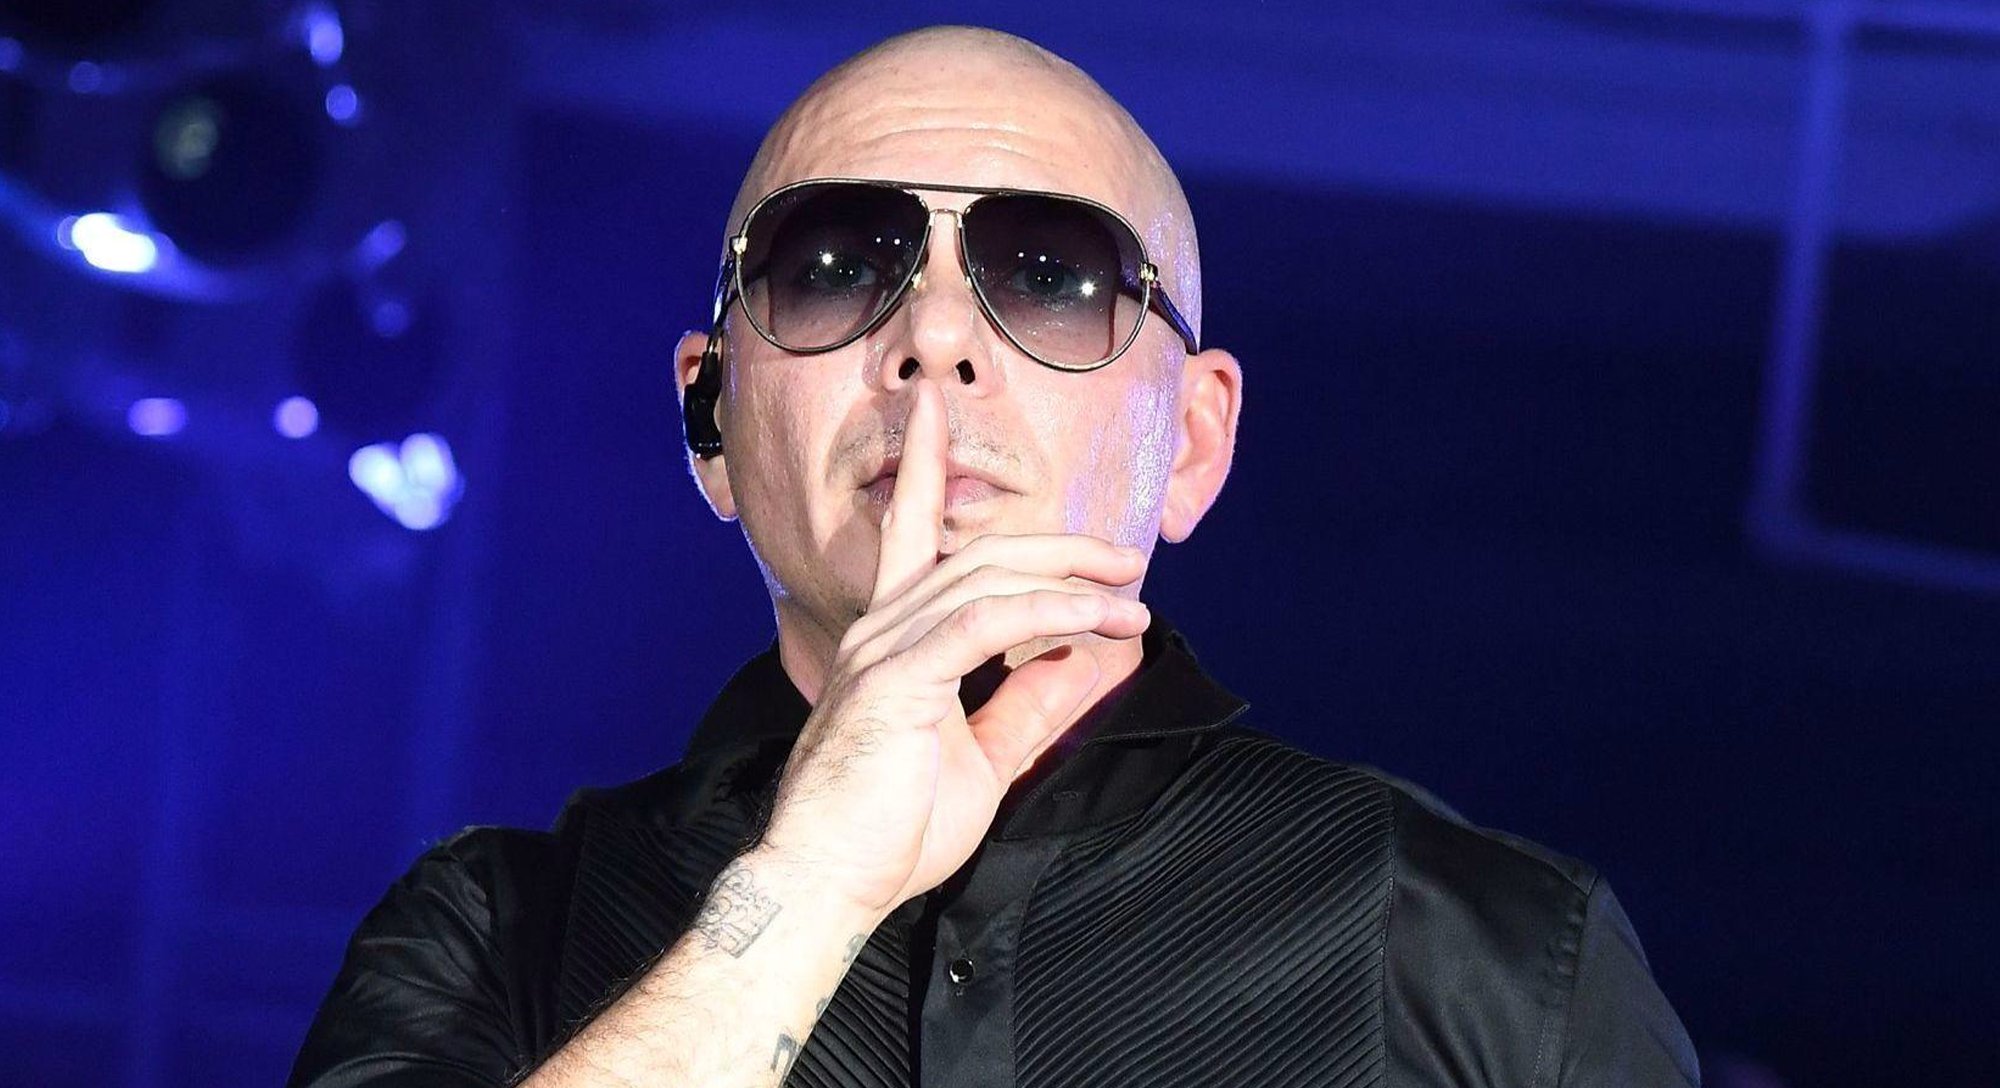 pitbull to no longer perform at psl opening ceremony